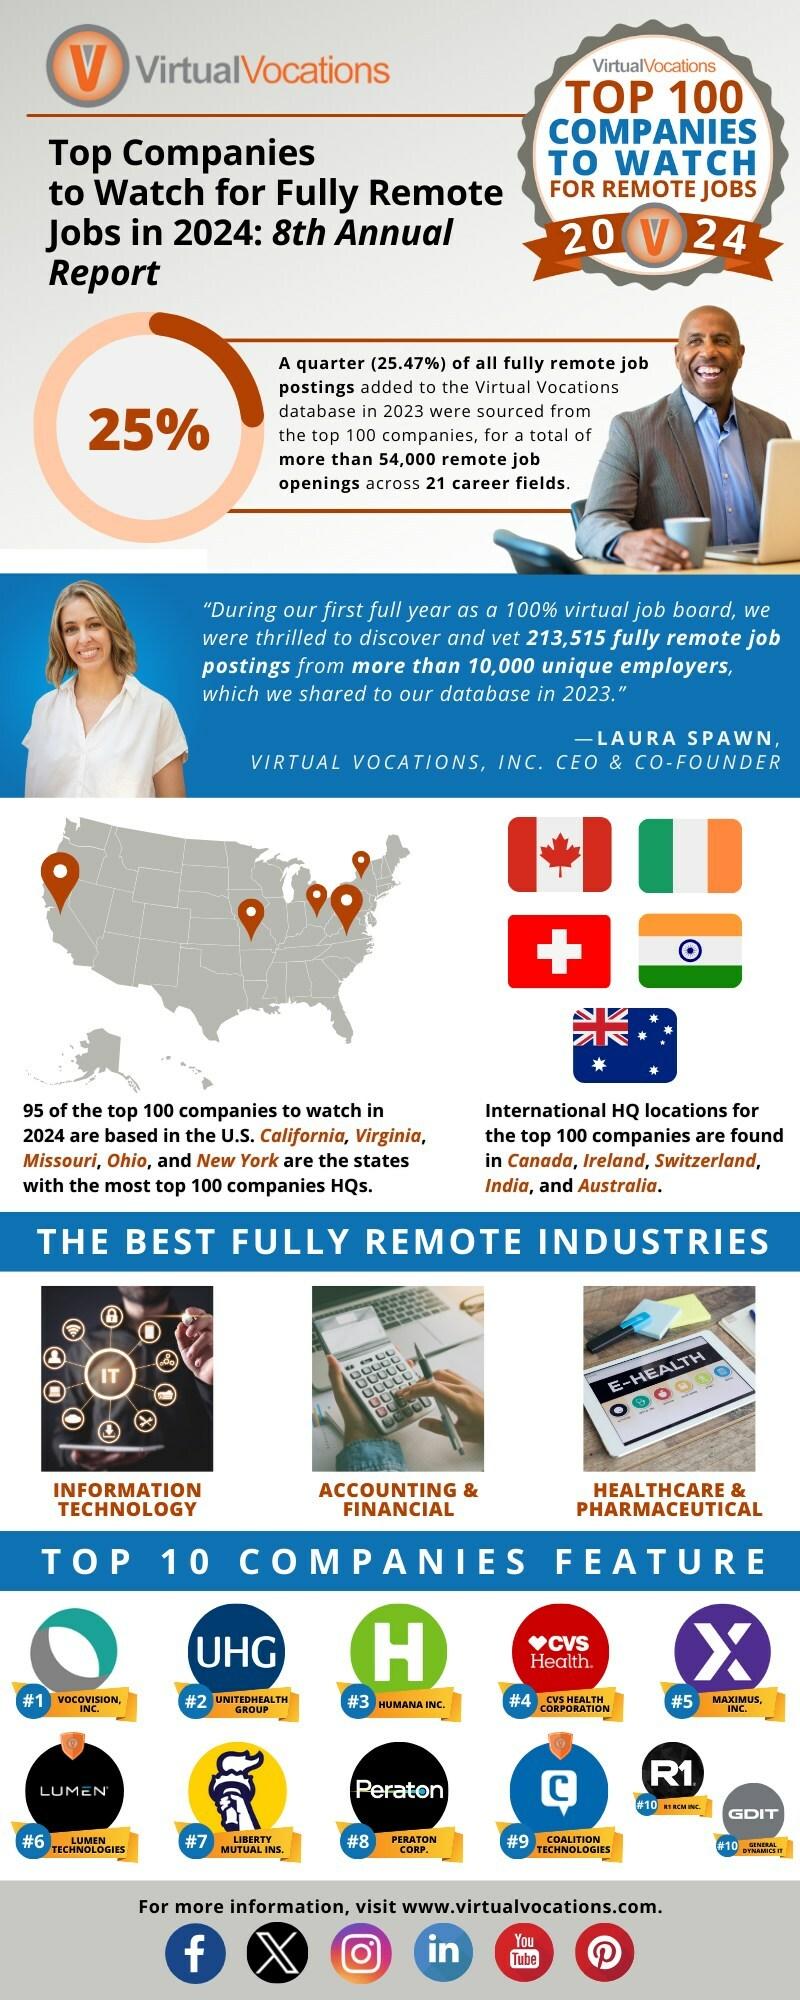 Virtual Vocations Names the Top 100 Companies for Fully Remote Jobs in 2024